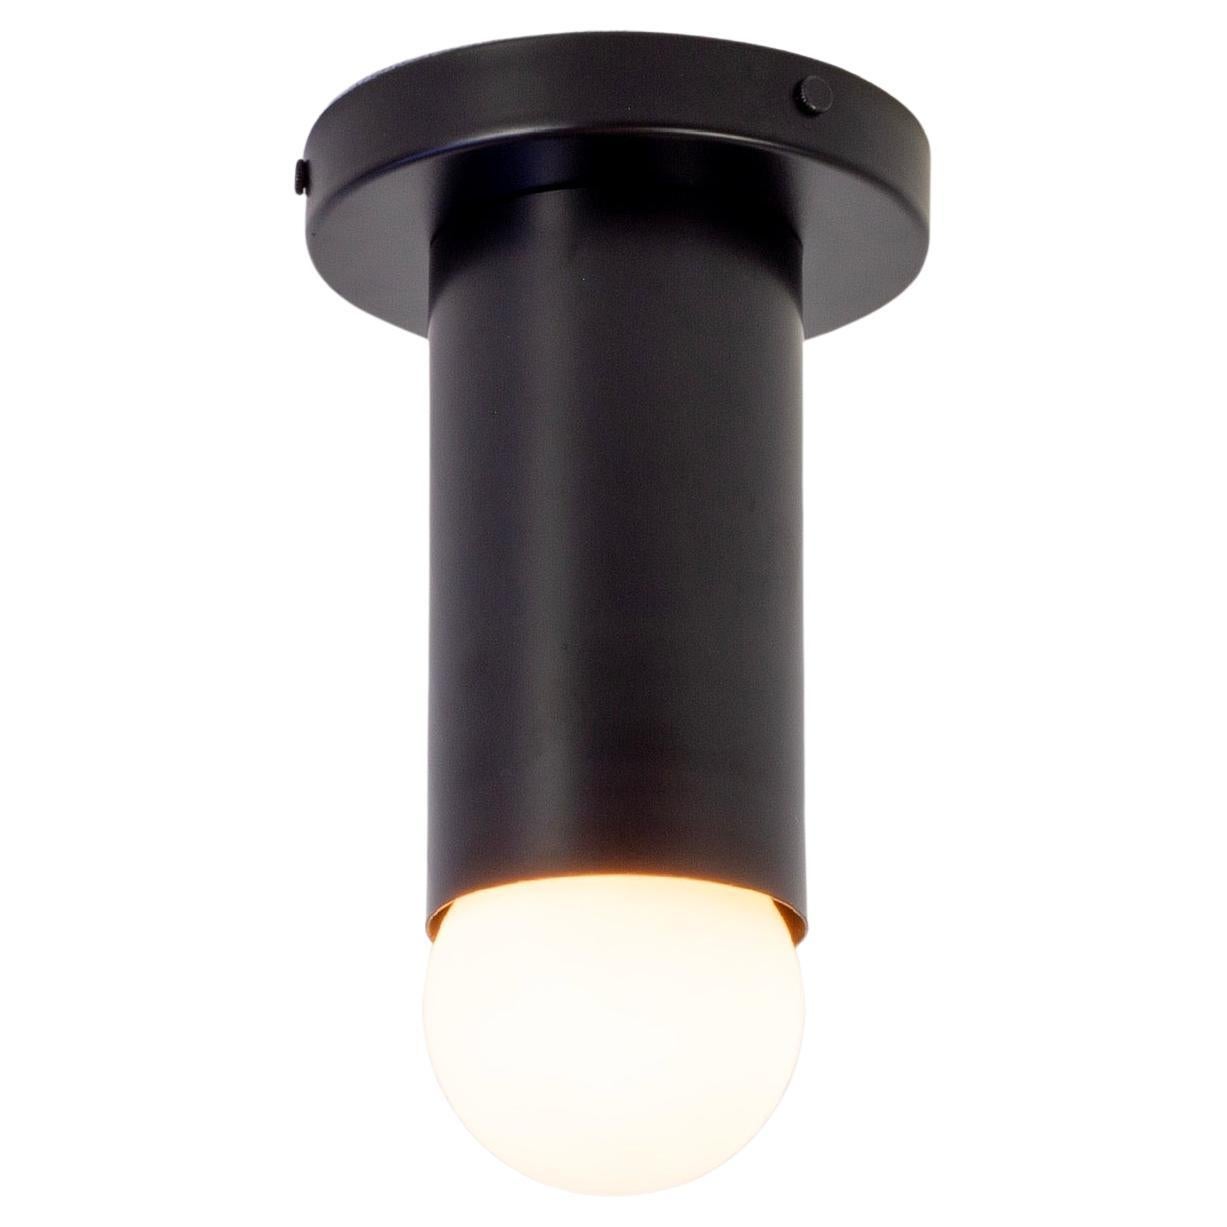 Deep Flush Mount by Research.Lighting, Black, Made to Order For Sale